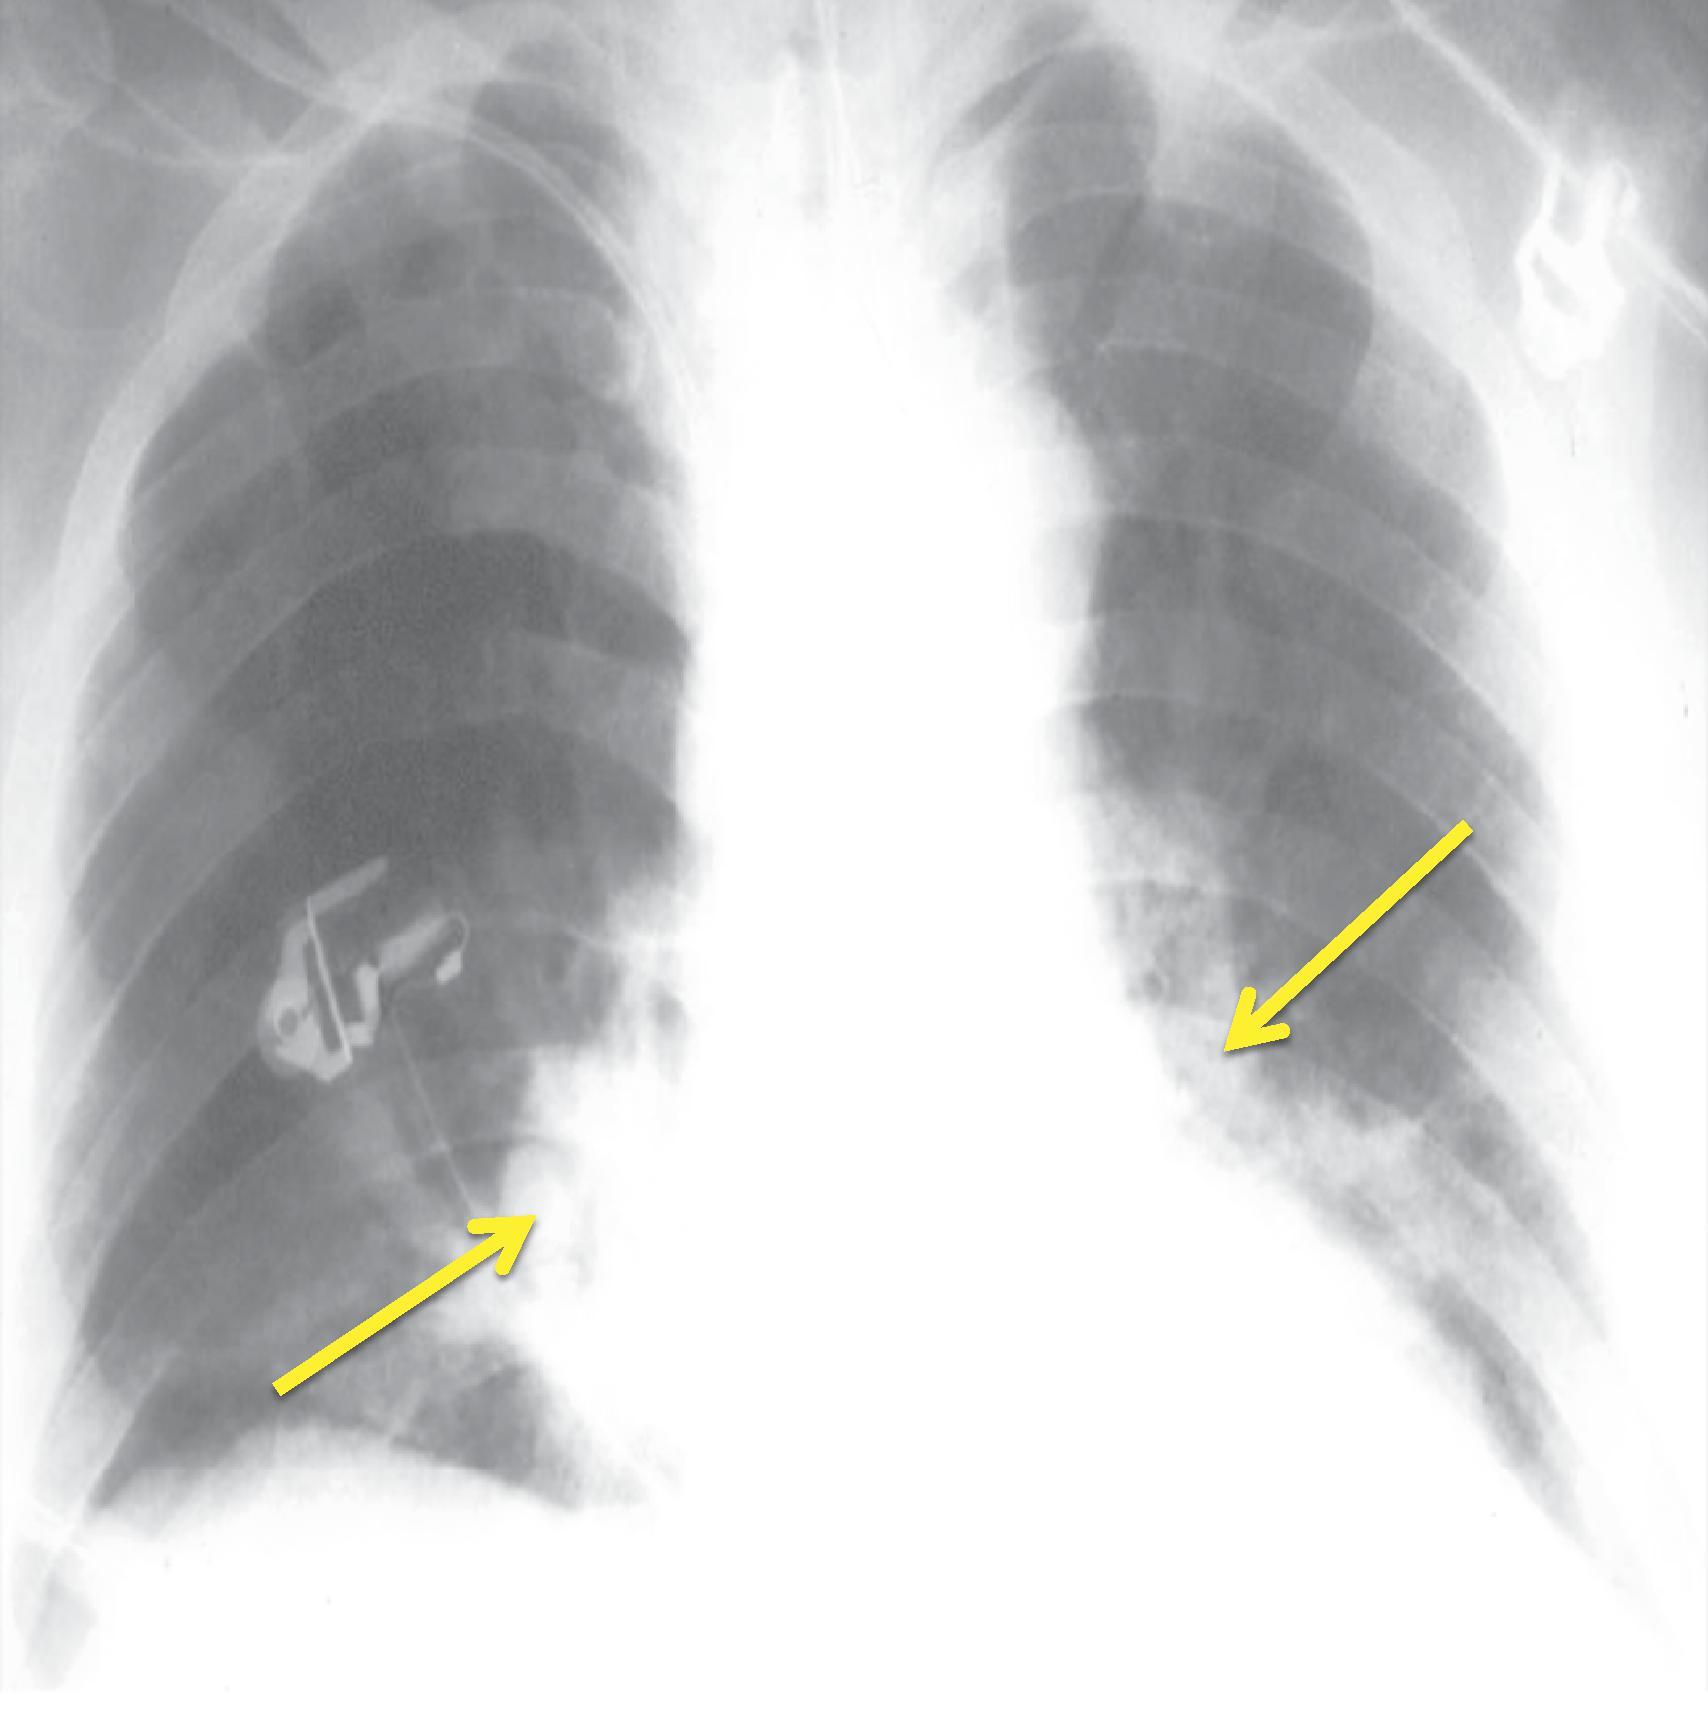 Fig. 14.1, Chest x-ray performed after tracheal intubation. Pulmonary infiltrates are seen in the dependent parts of the lungs (arrows) .